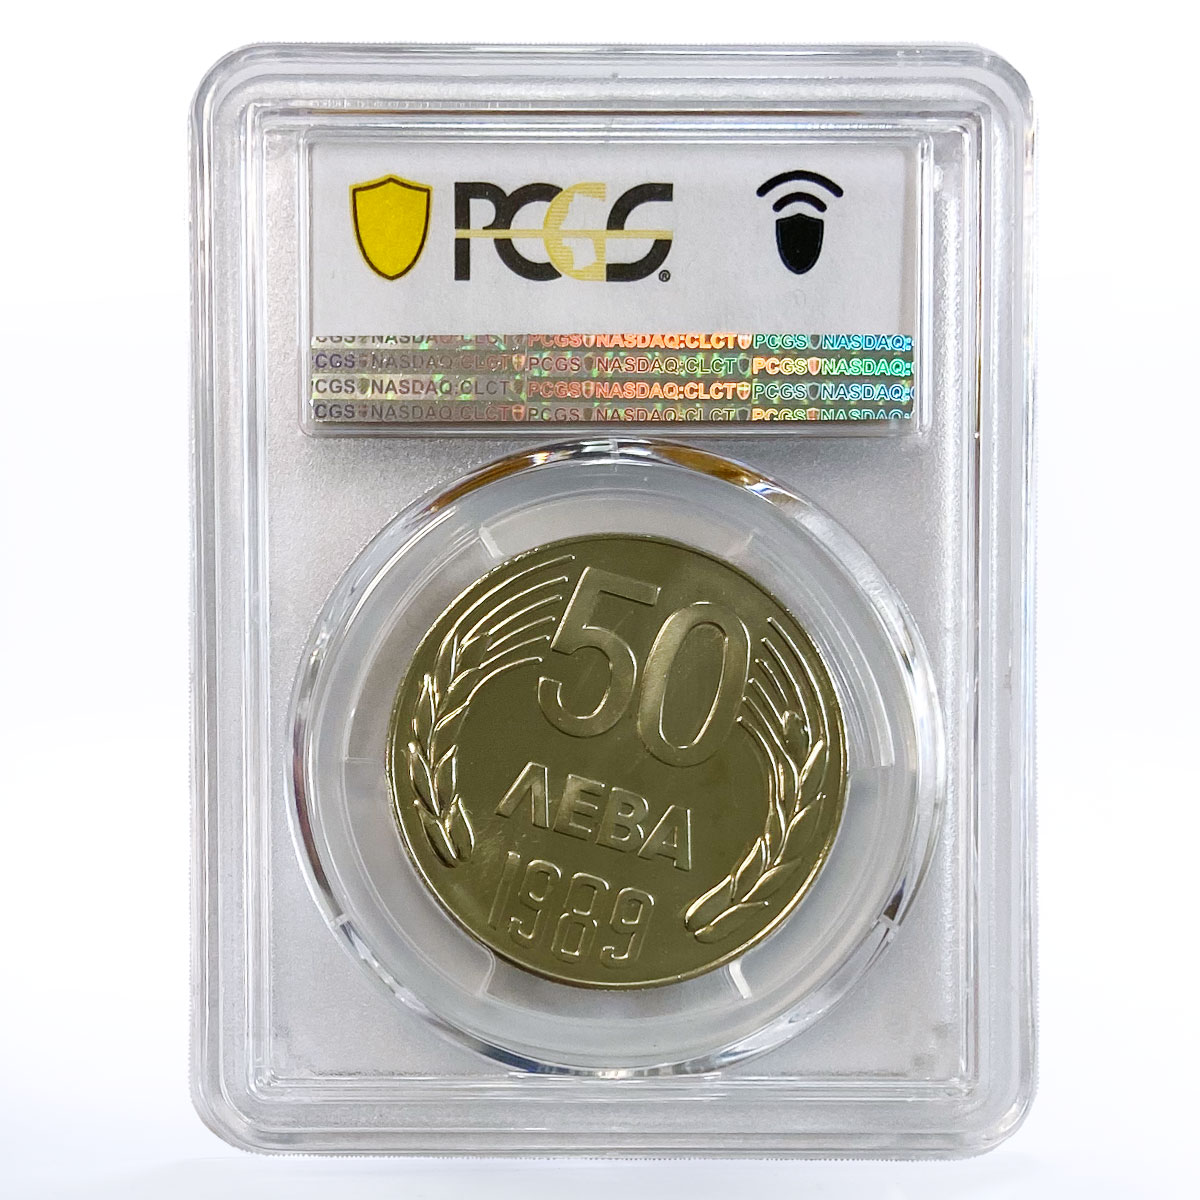 Bulgaria 50 leva Coats of Arms State Coinage PR67 PCGS CuNi coin 1989